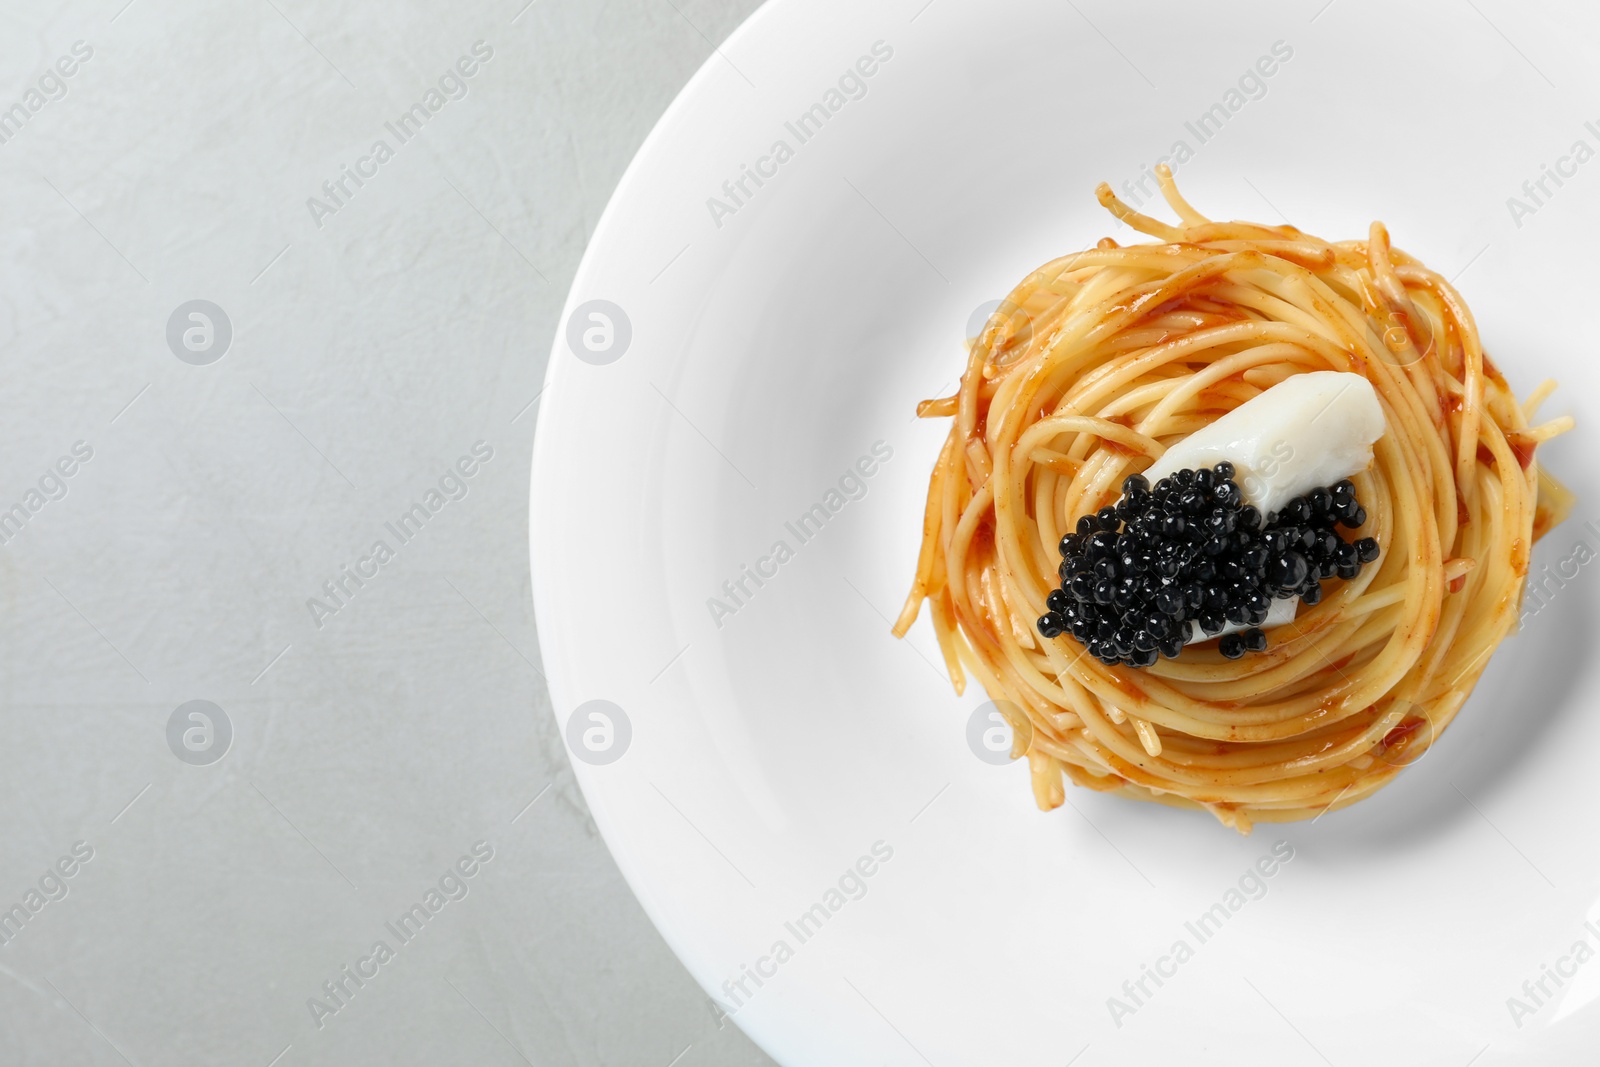 Photo of Tasty spaghetti with tomato sauce and black caviar on light grey table, top view. Exquisite presentation of pasta dish